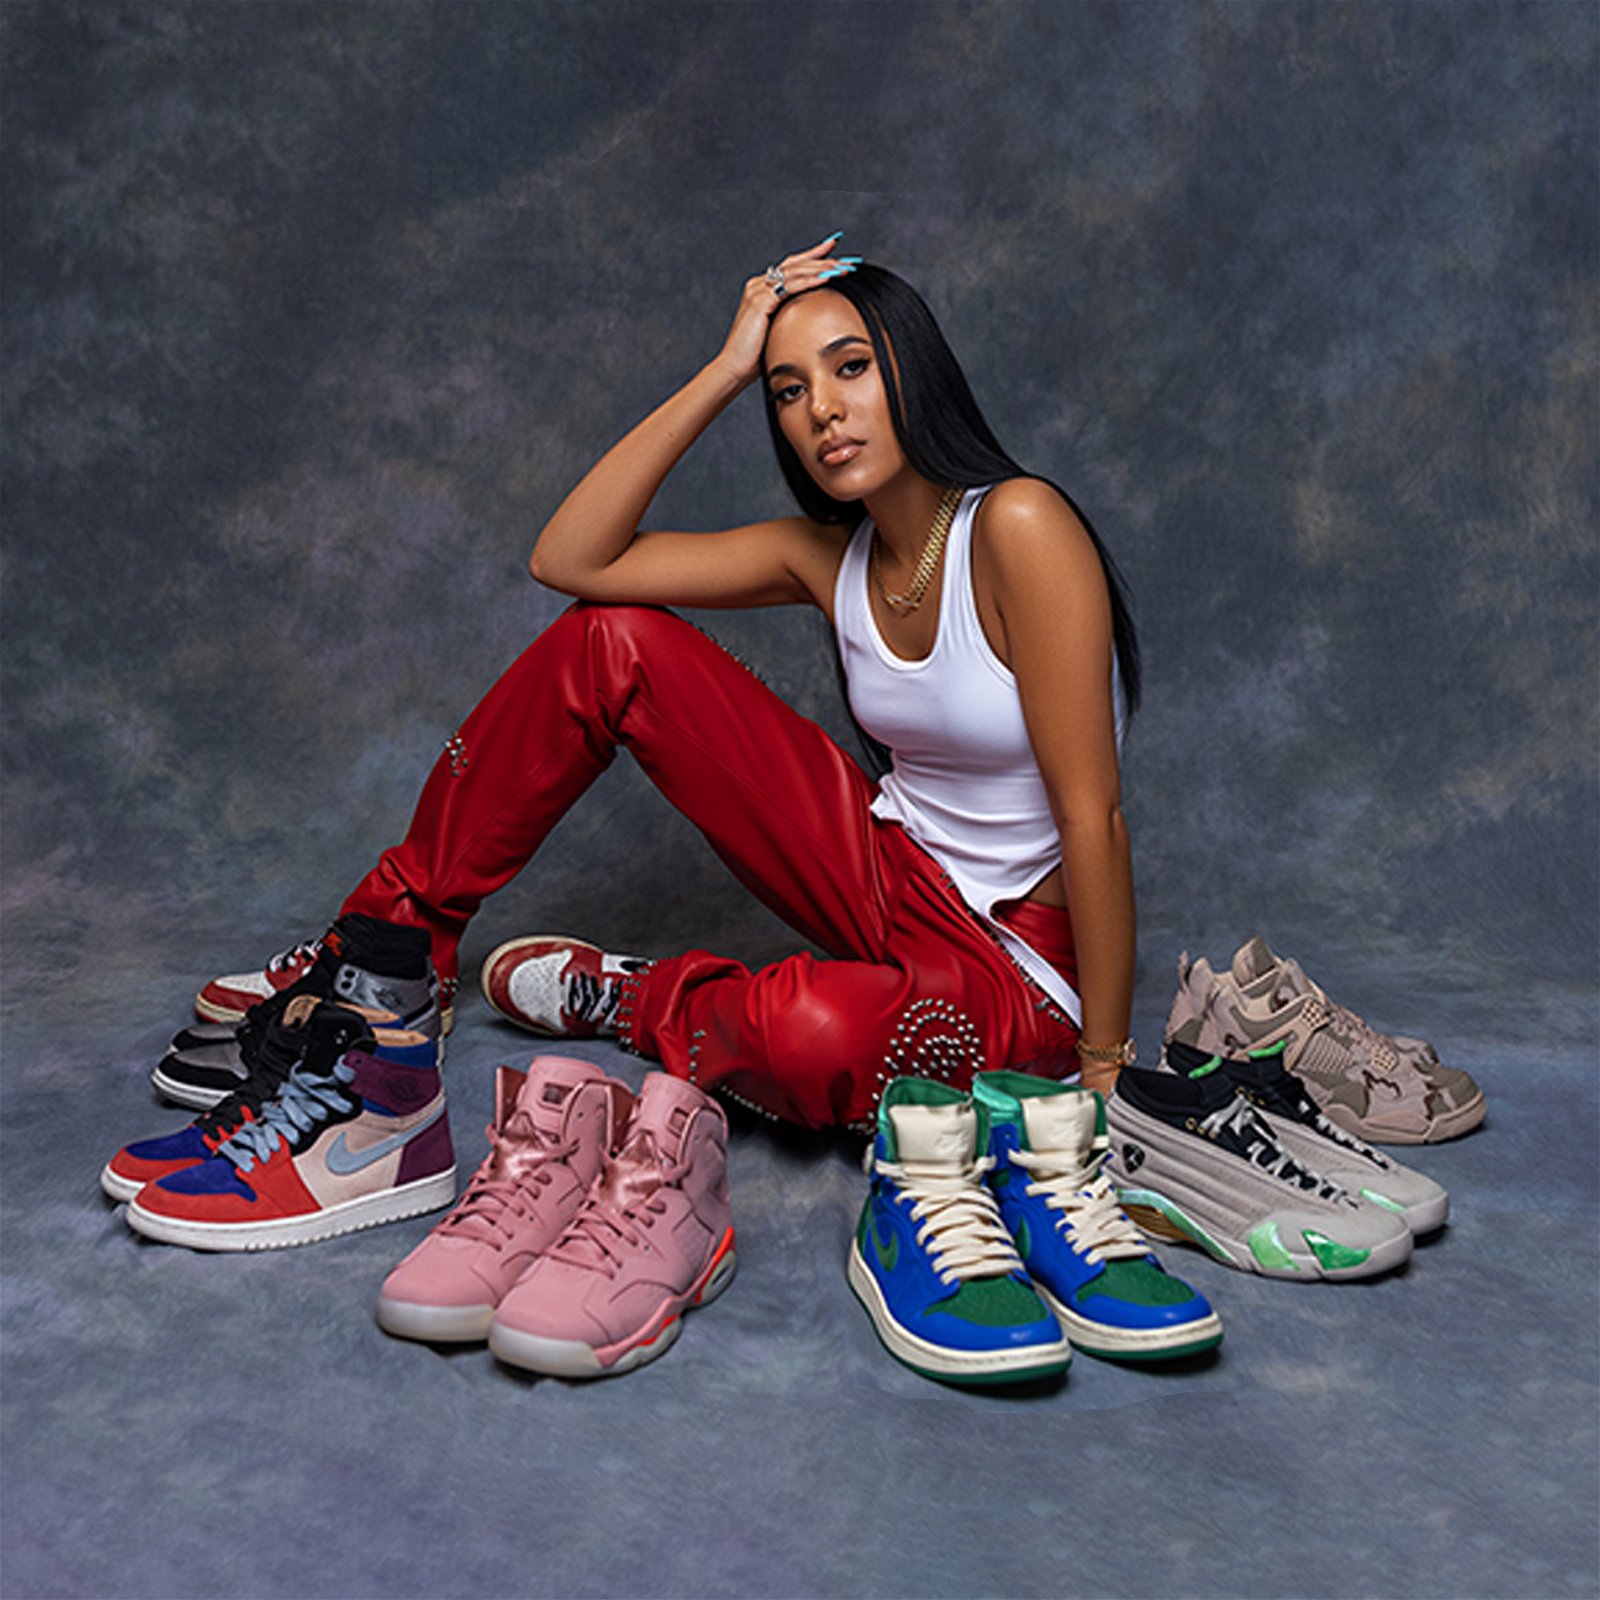 Influential Women in the World of Sneakers